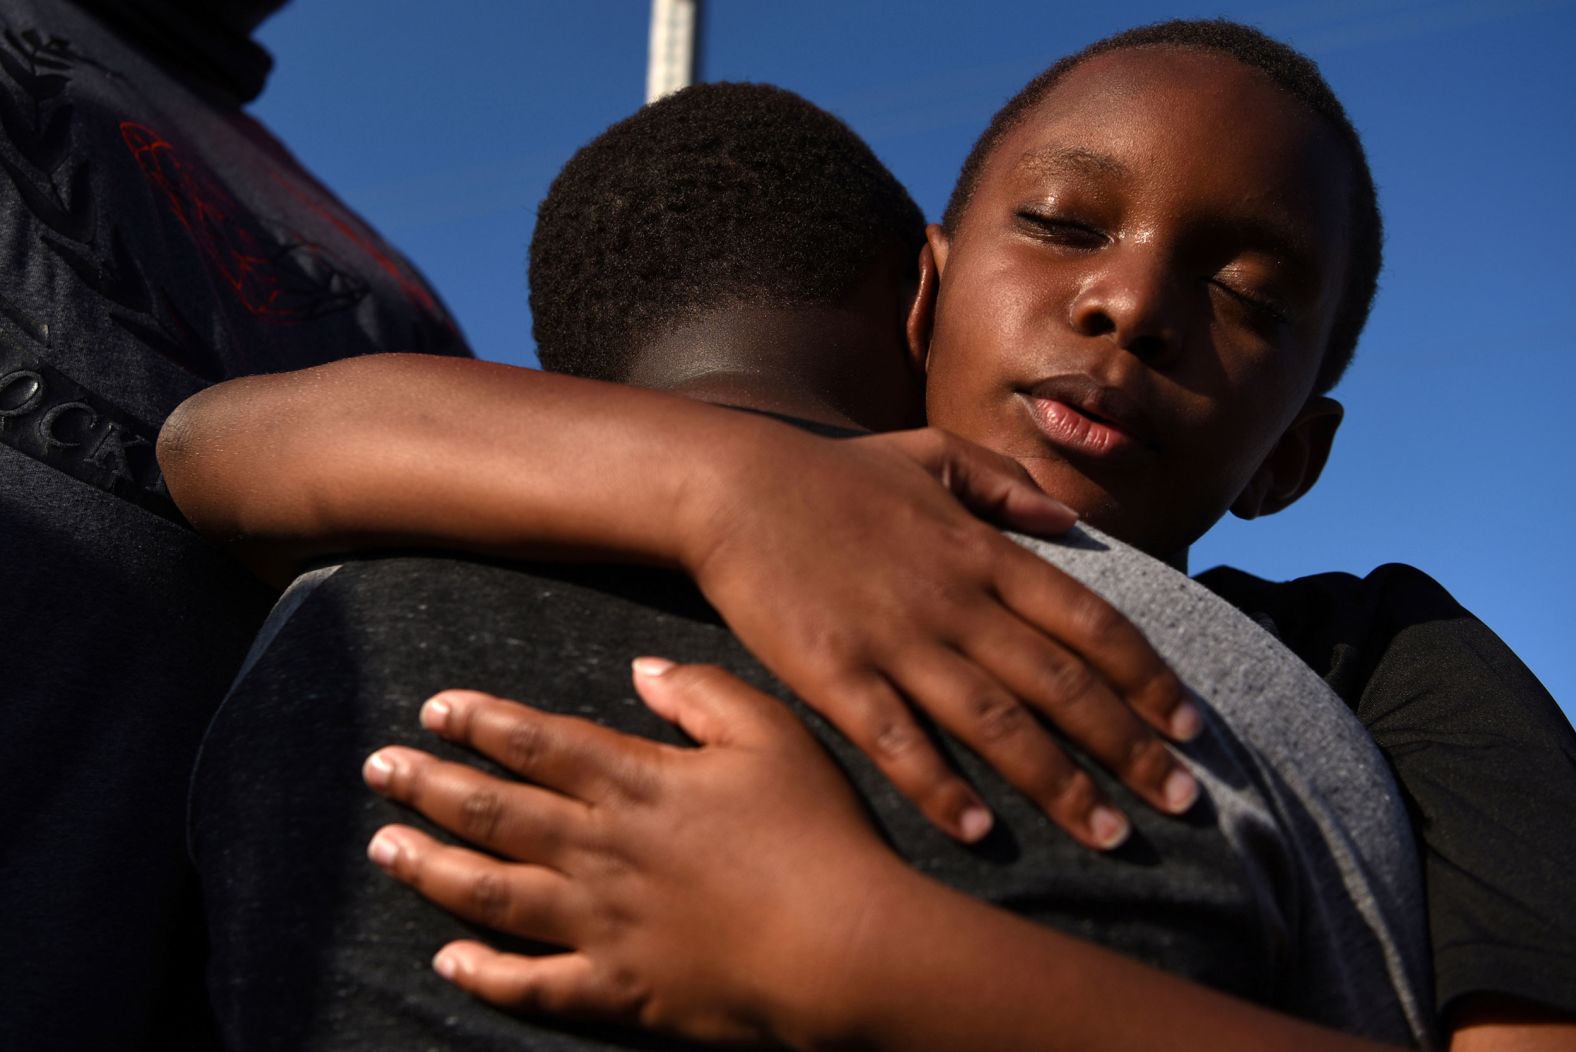 Brothers Brody and Braeden Maxey share a hug during a reenactment to celebrate Juneteenth in Galveston.